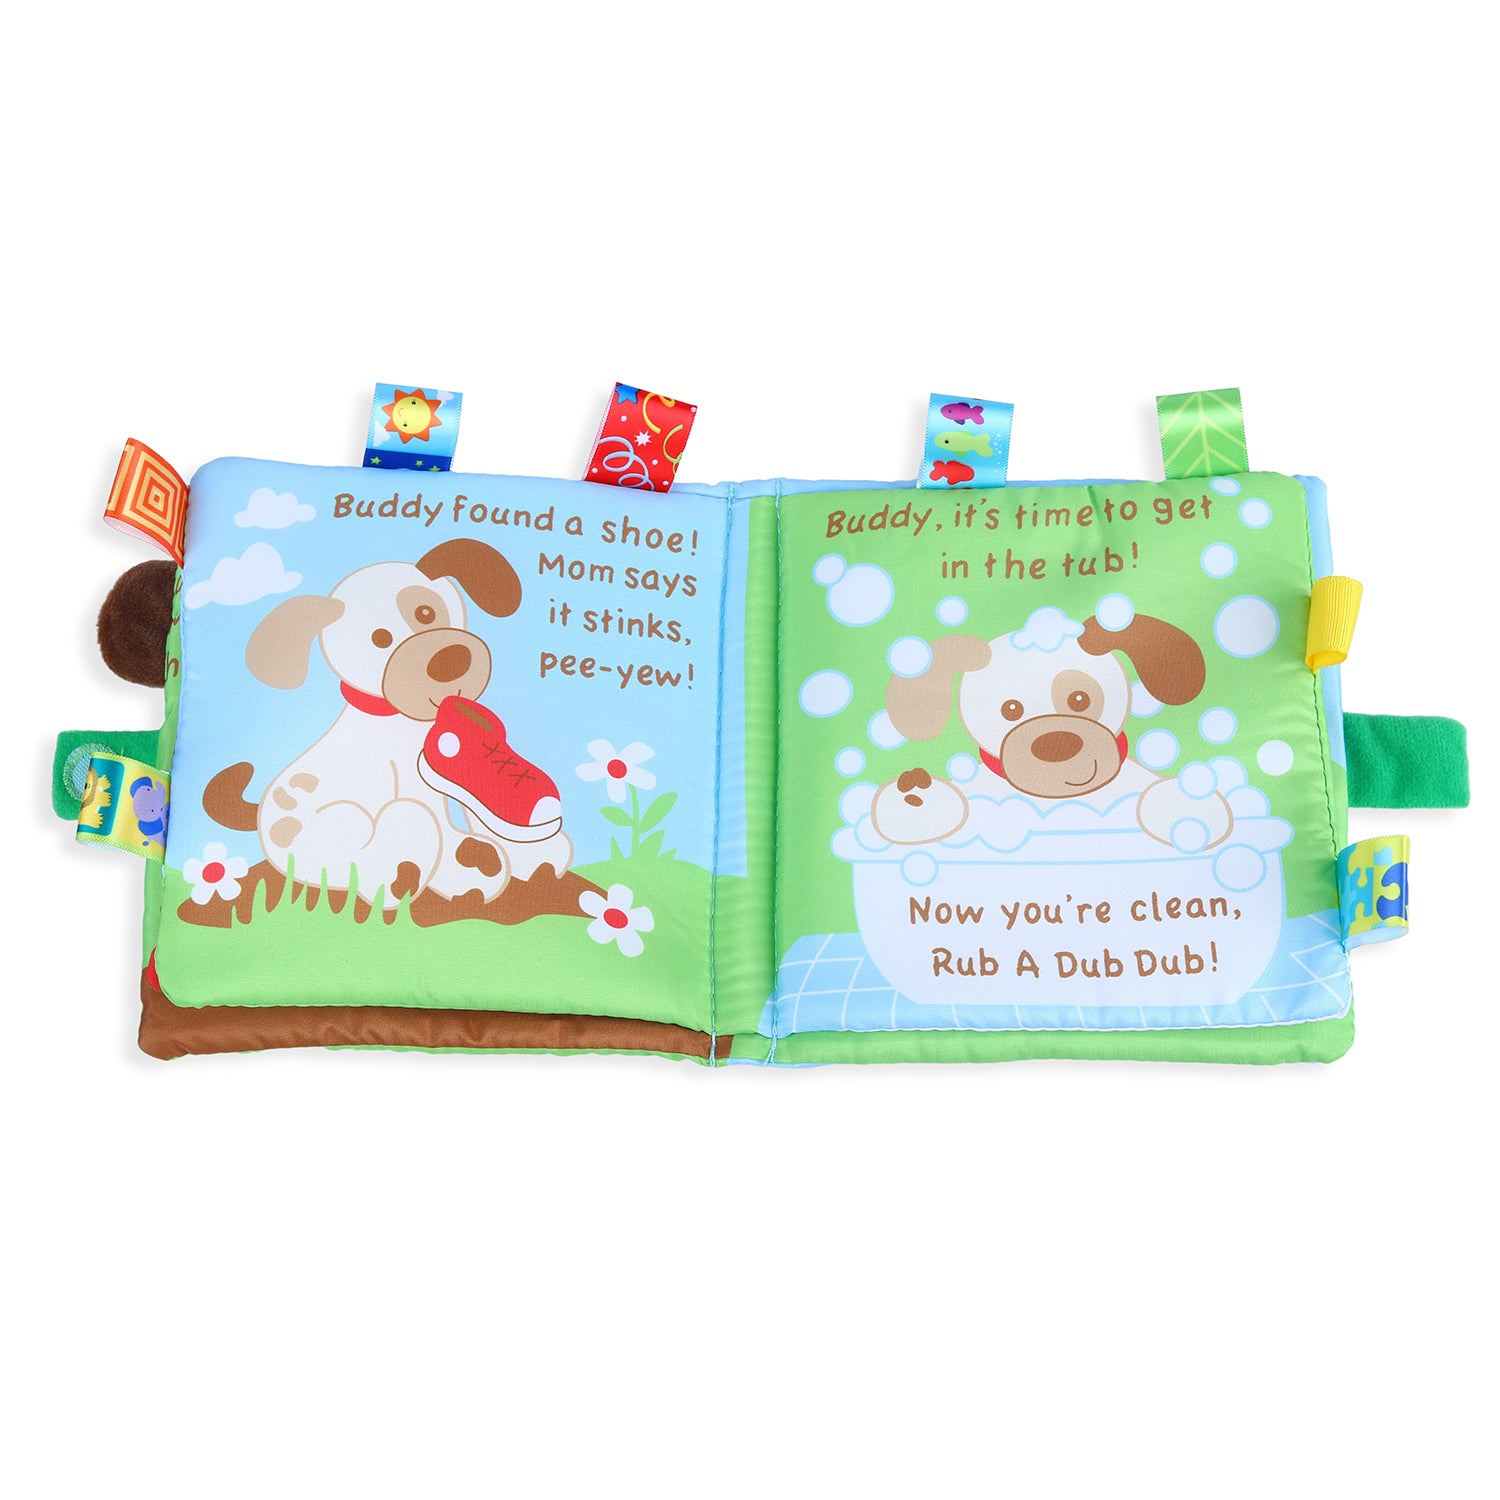 Buddy Dog Educational Learning 3D Cloth Book With Rustle Paper - Multicolour - Baby Moo